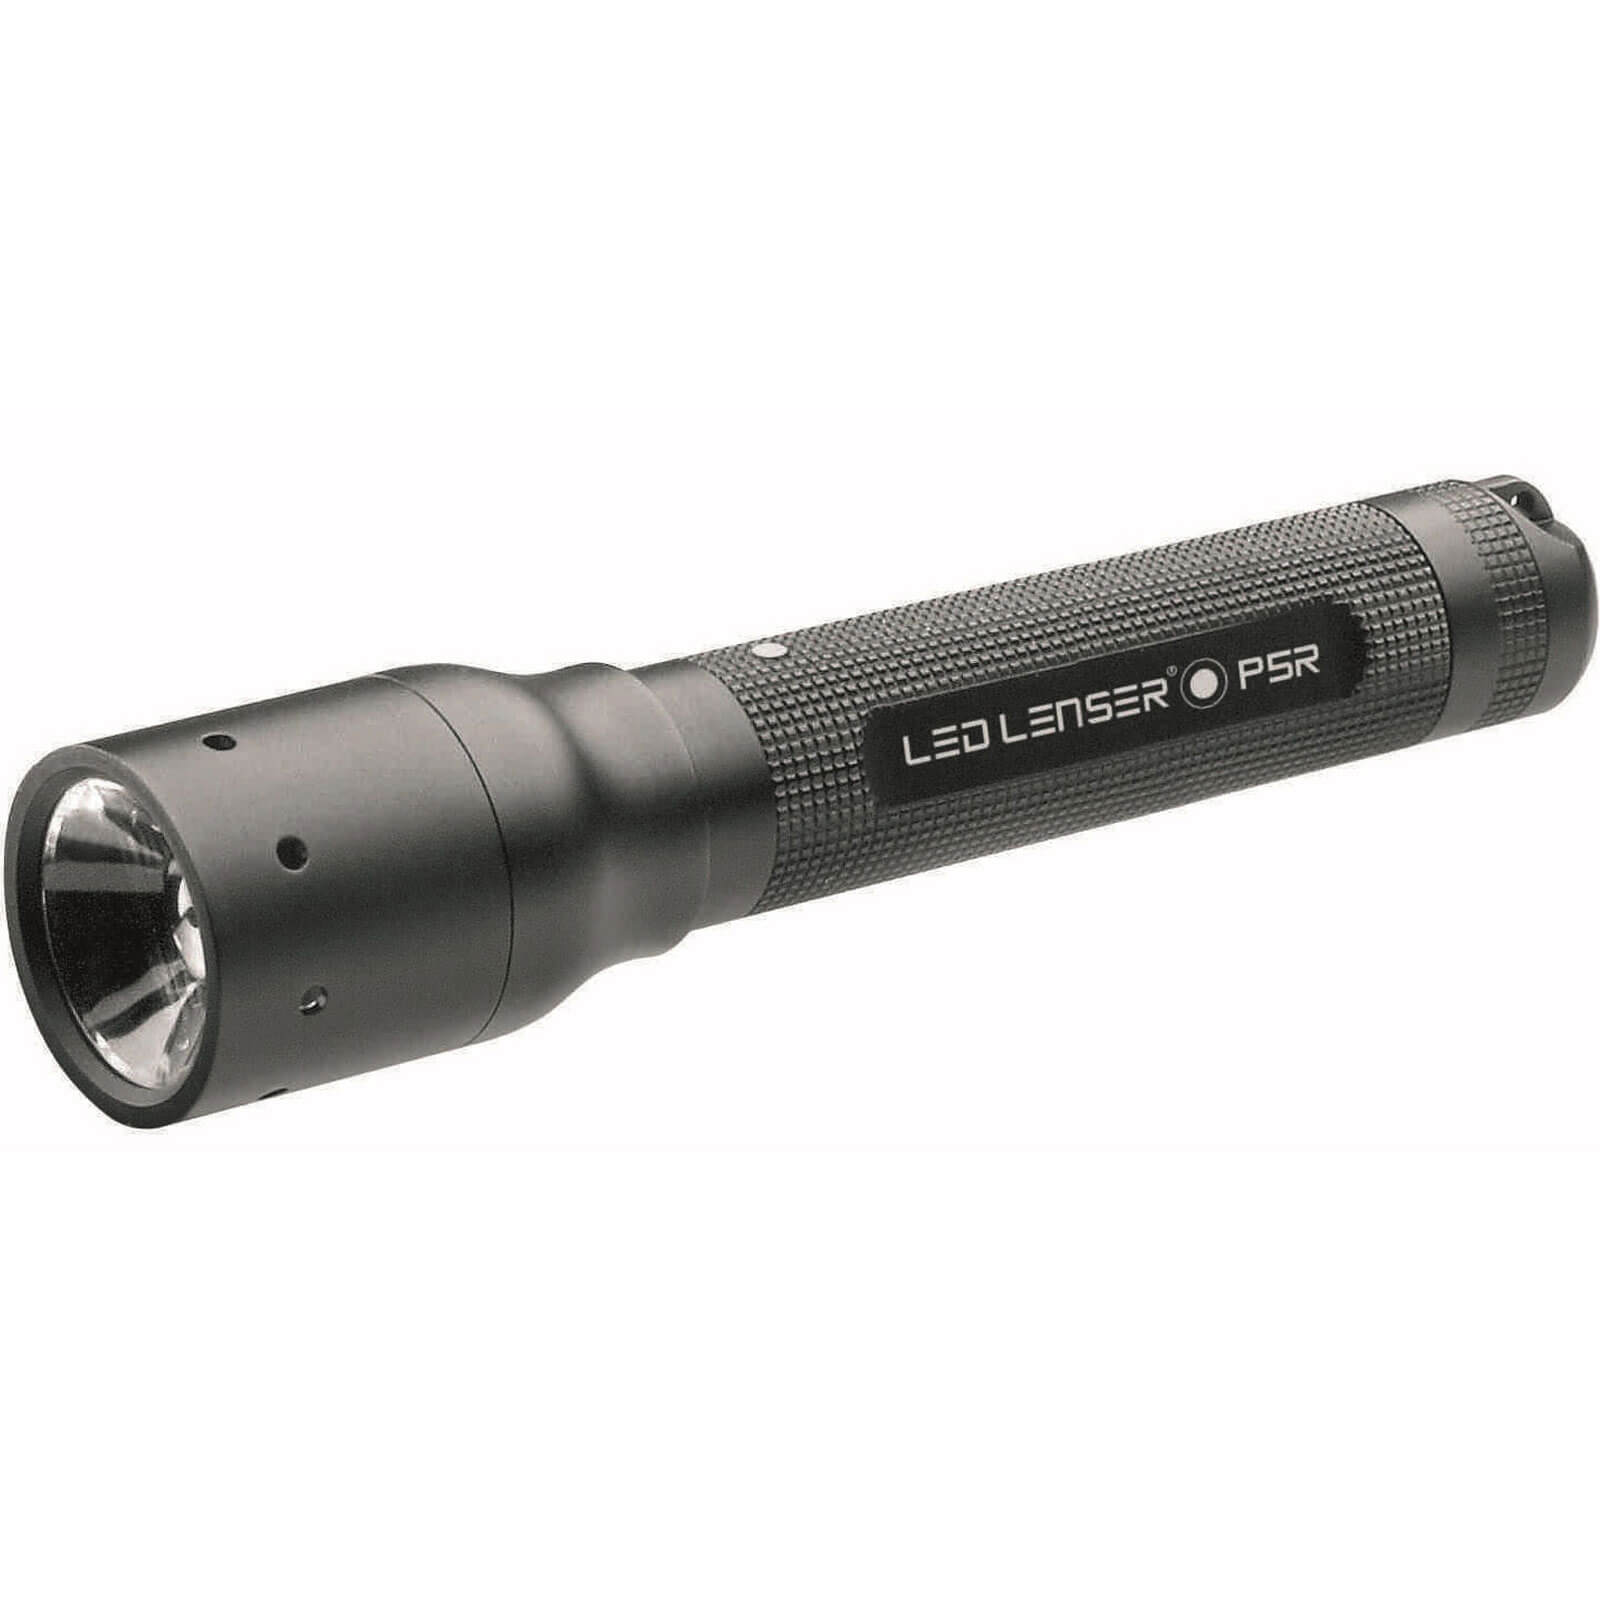 LED Lenser P5R Professional Rechargeable Focusing Torch Black in Case 210 Lumens Plus FREE Car Charg